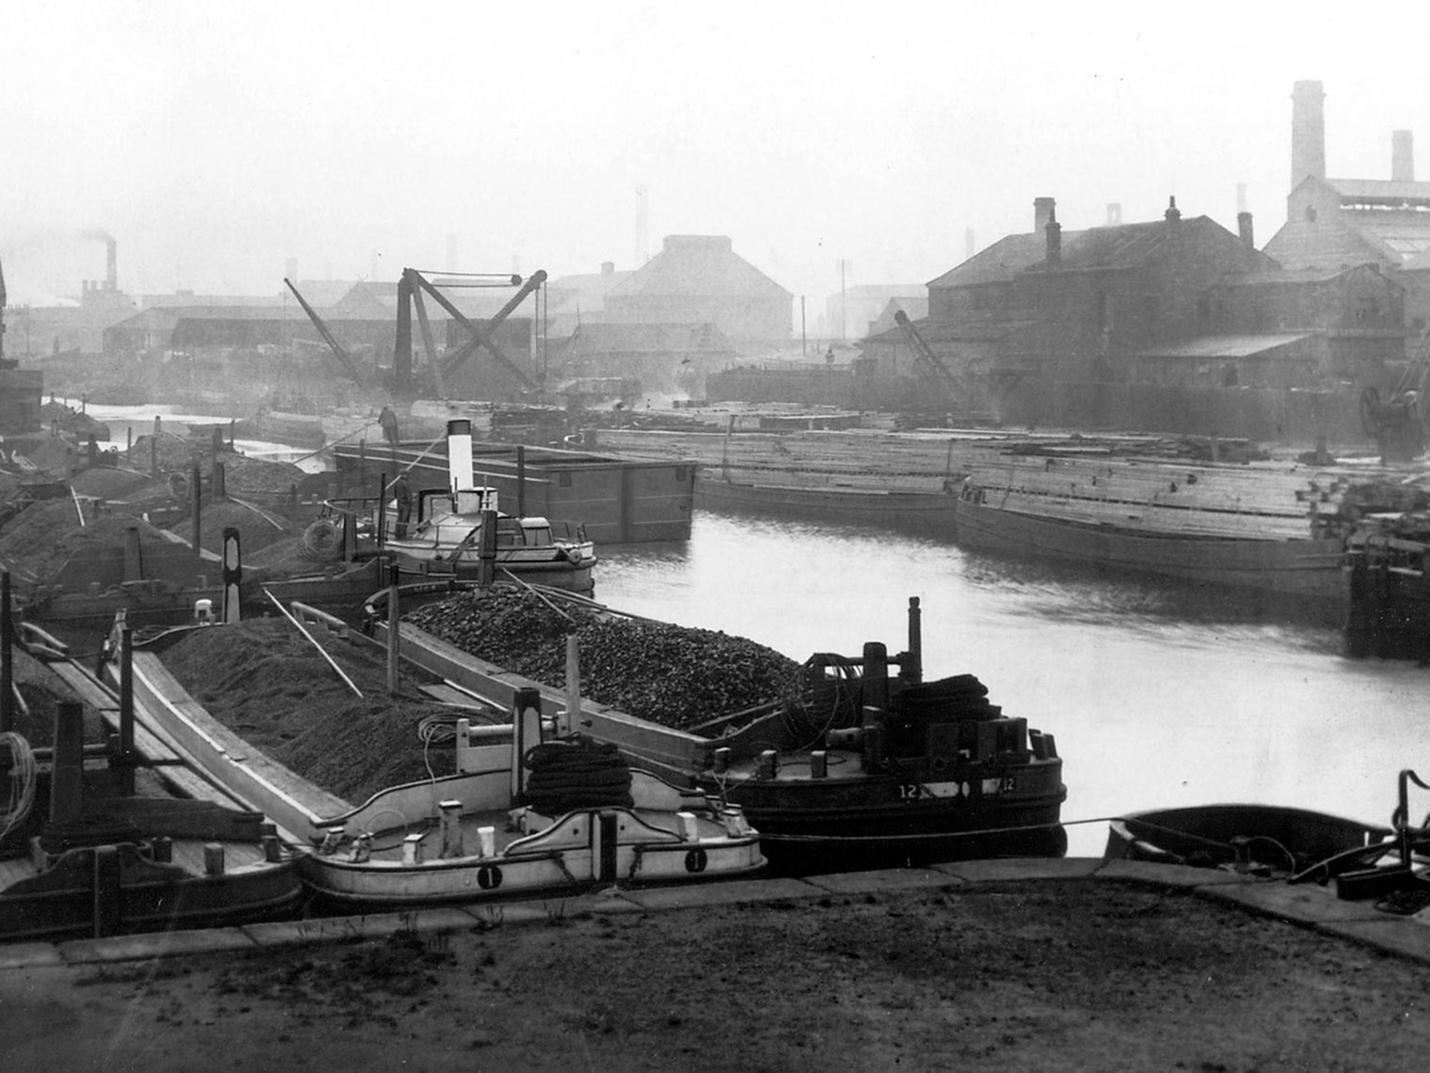 A view of Clarence Dock in Leeds during the 1920s.